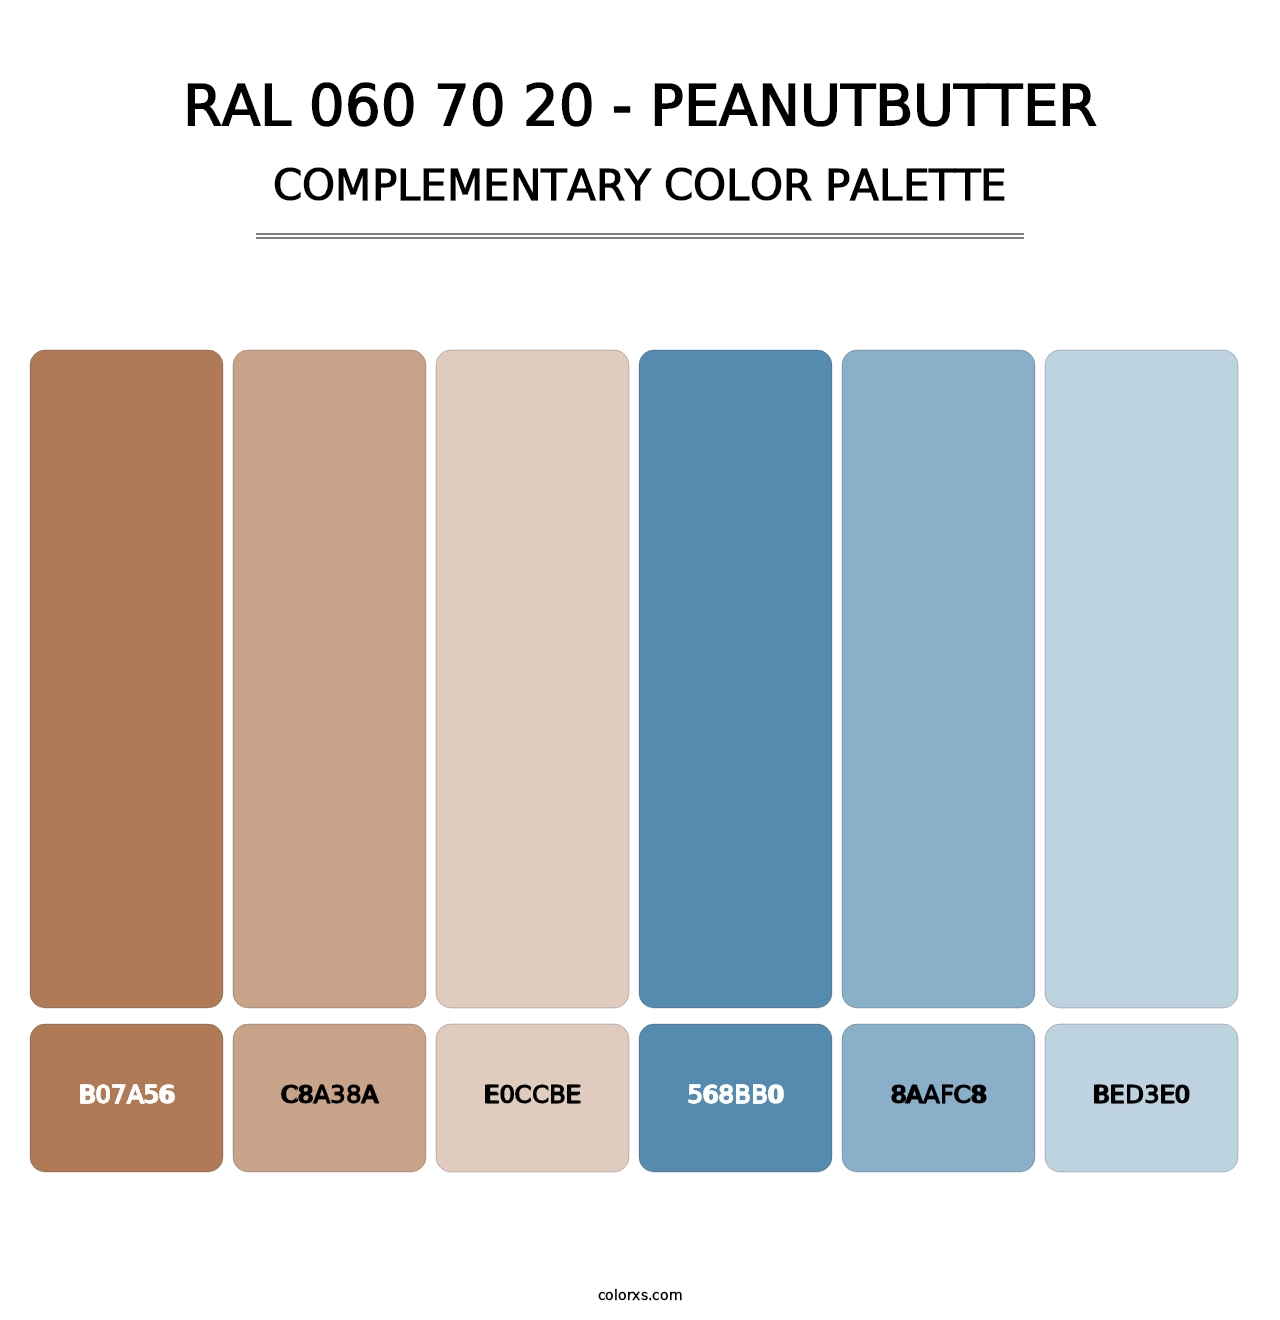 RAL 060 70 20 - Peanutbutter - Complementary Color Palette